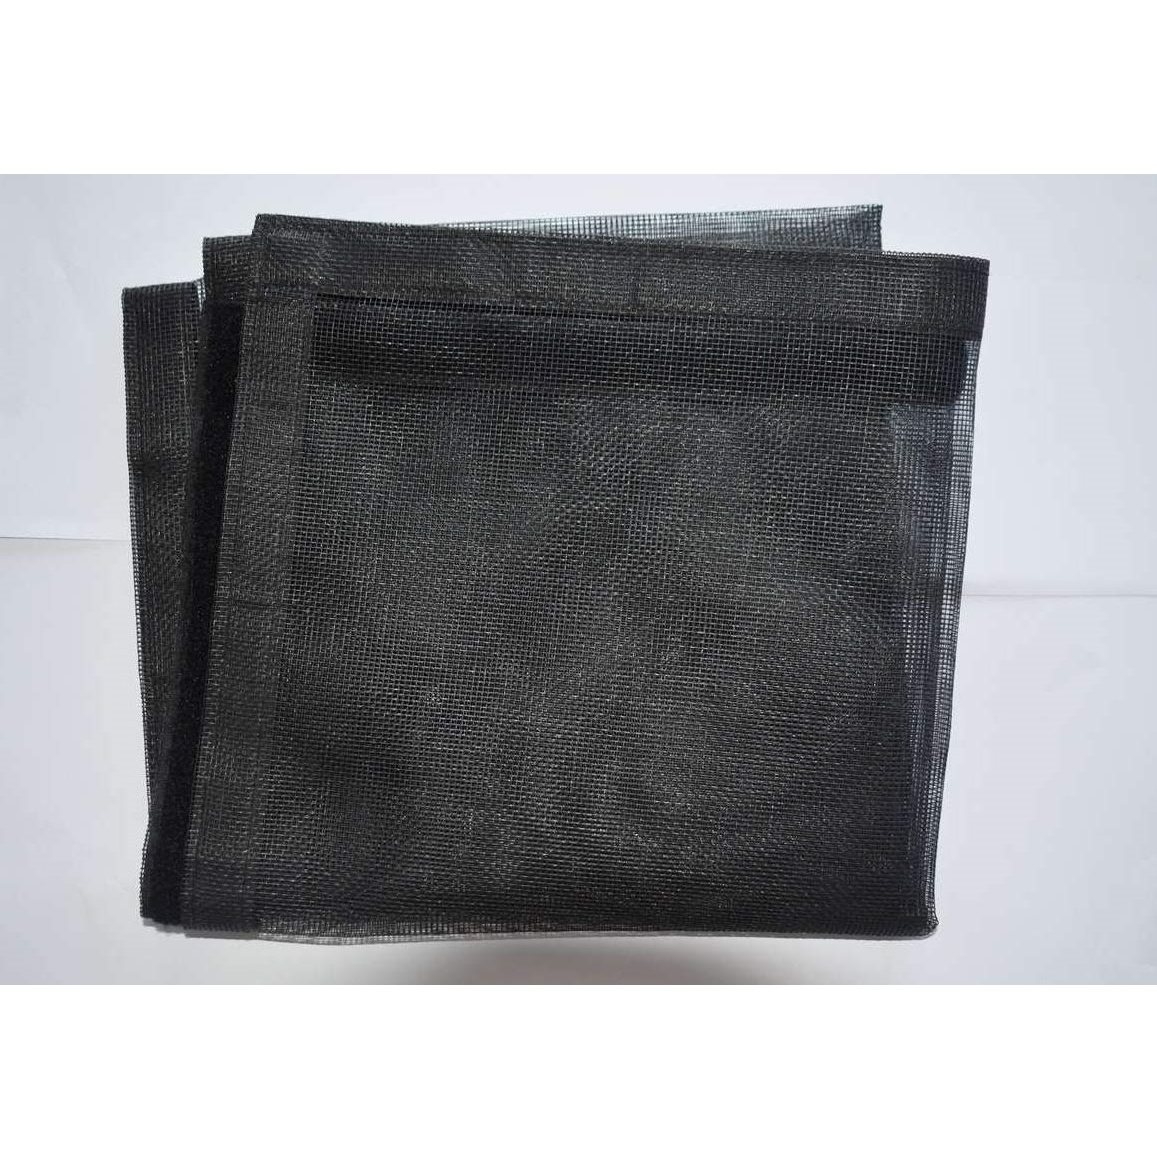 Black Pre-Stitched Mosquito Mesh with Self-Adhesive Hook Tape for Windows